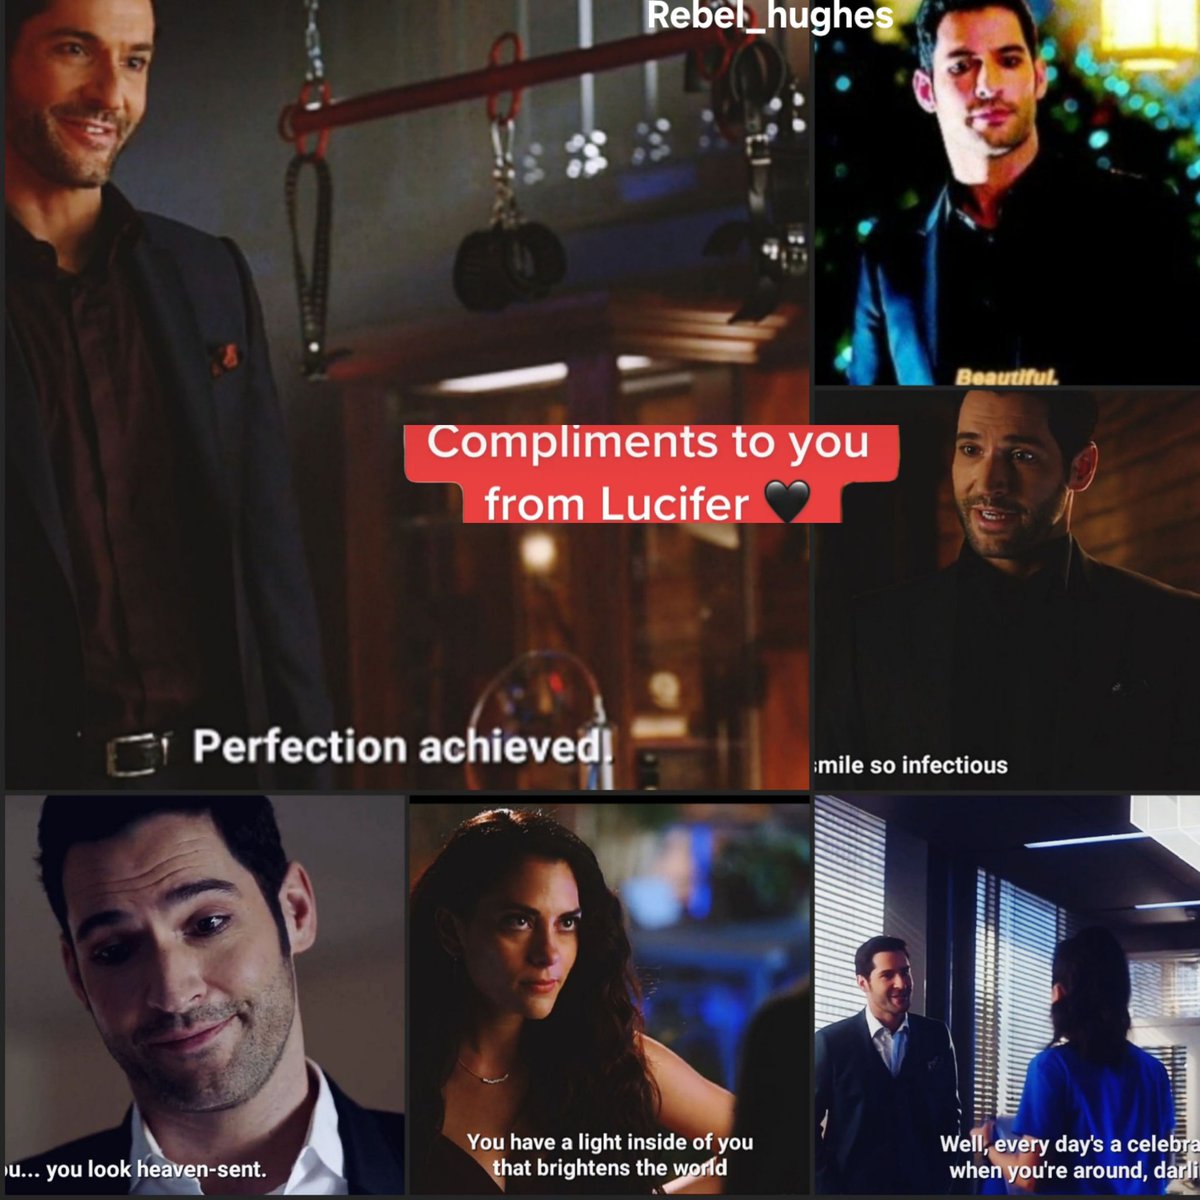 #WorldComplimentDay #TomEllis #Lucifer hope everyone knows how beautiful they truley are here each and every one of you make my day just a bit brighter